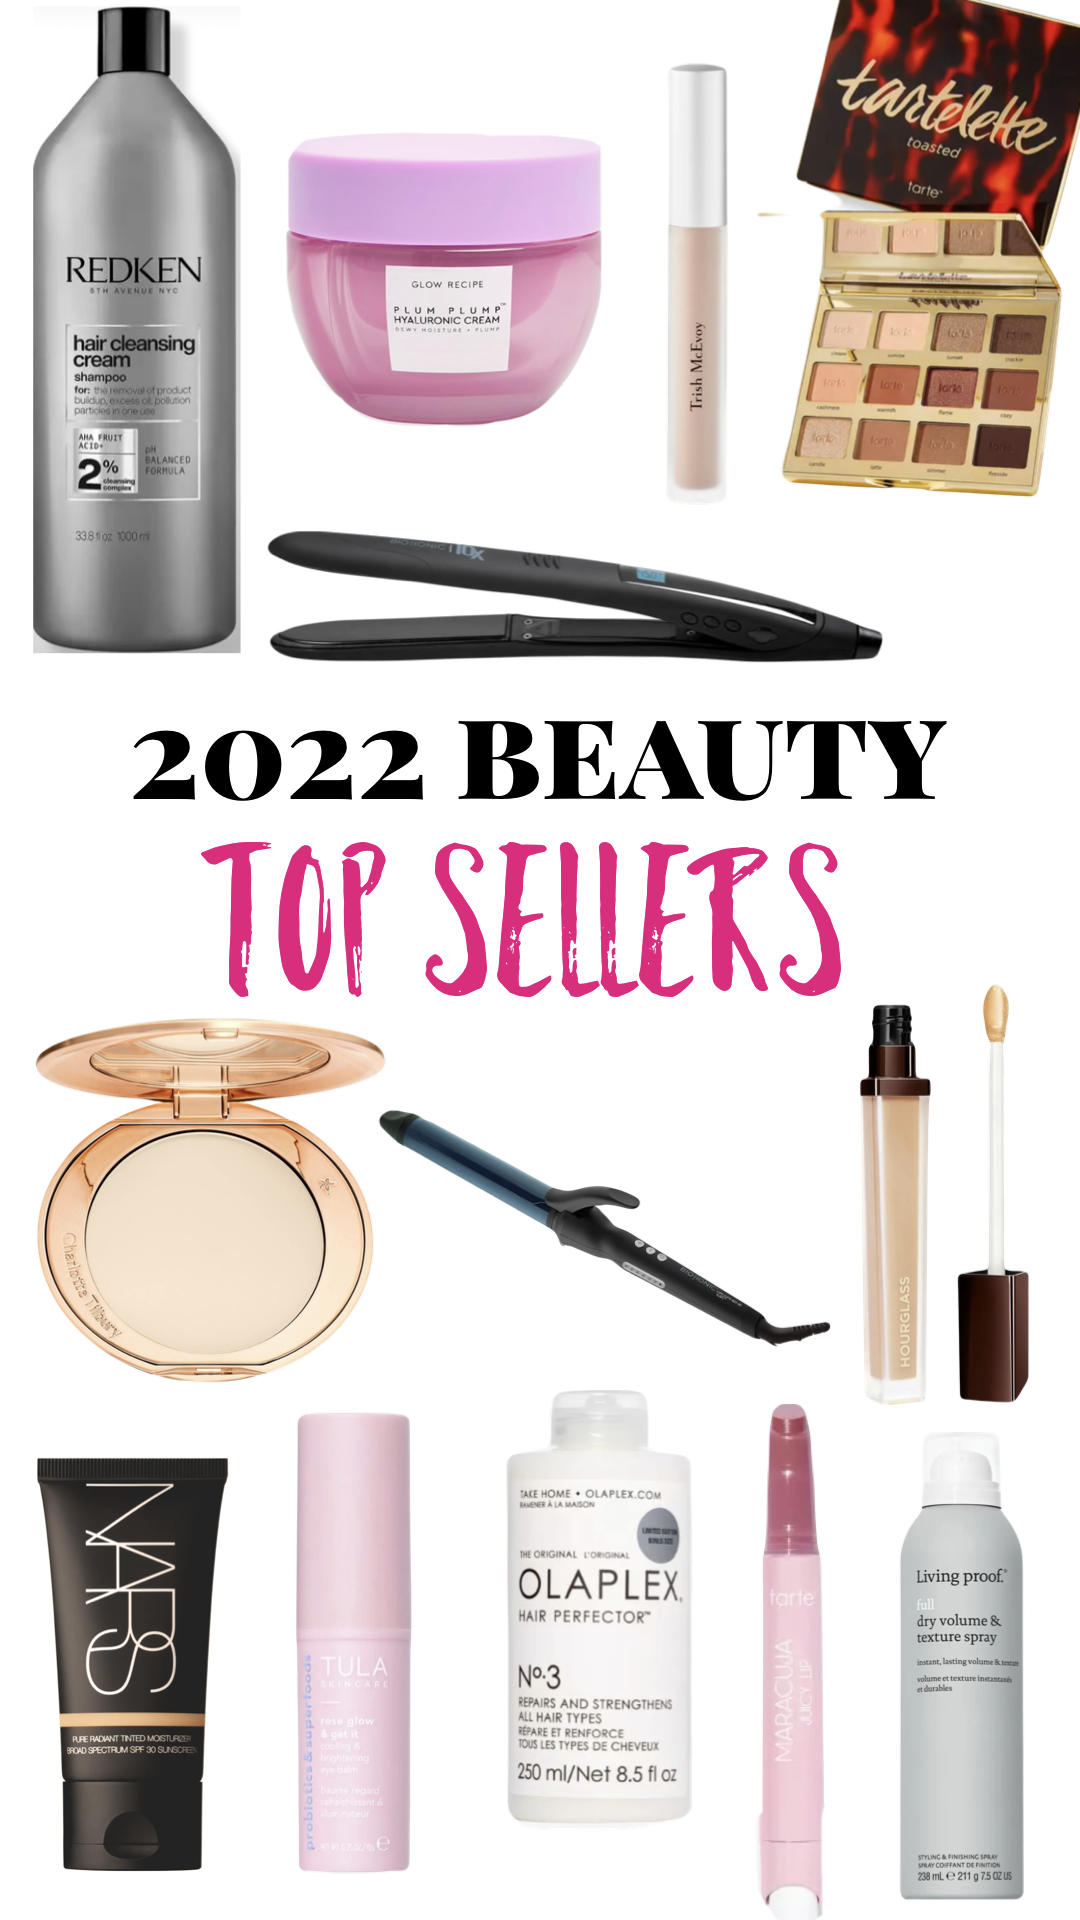 HOT AFFORDABLE MAKEUP ROUNDUP! For even more beauty deals head on